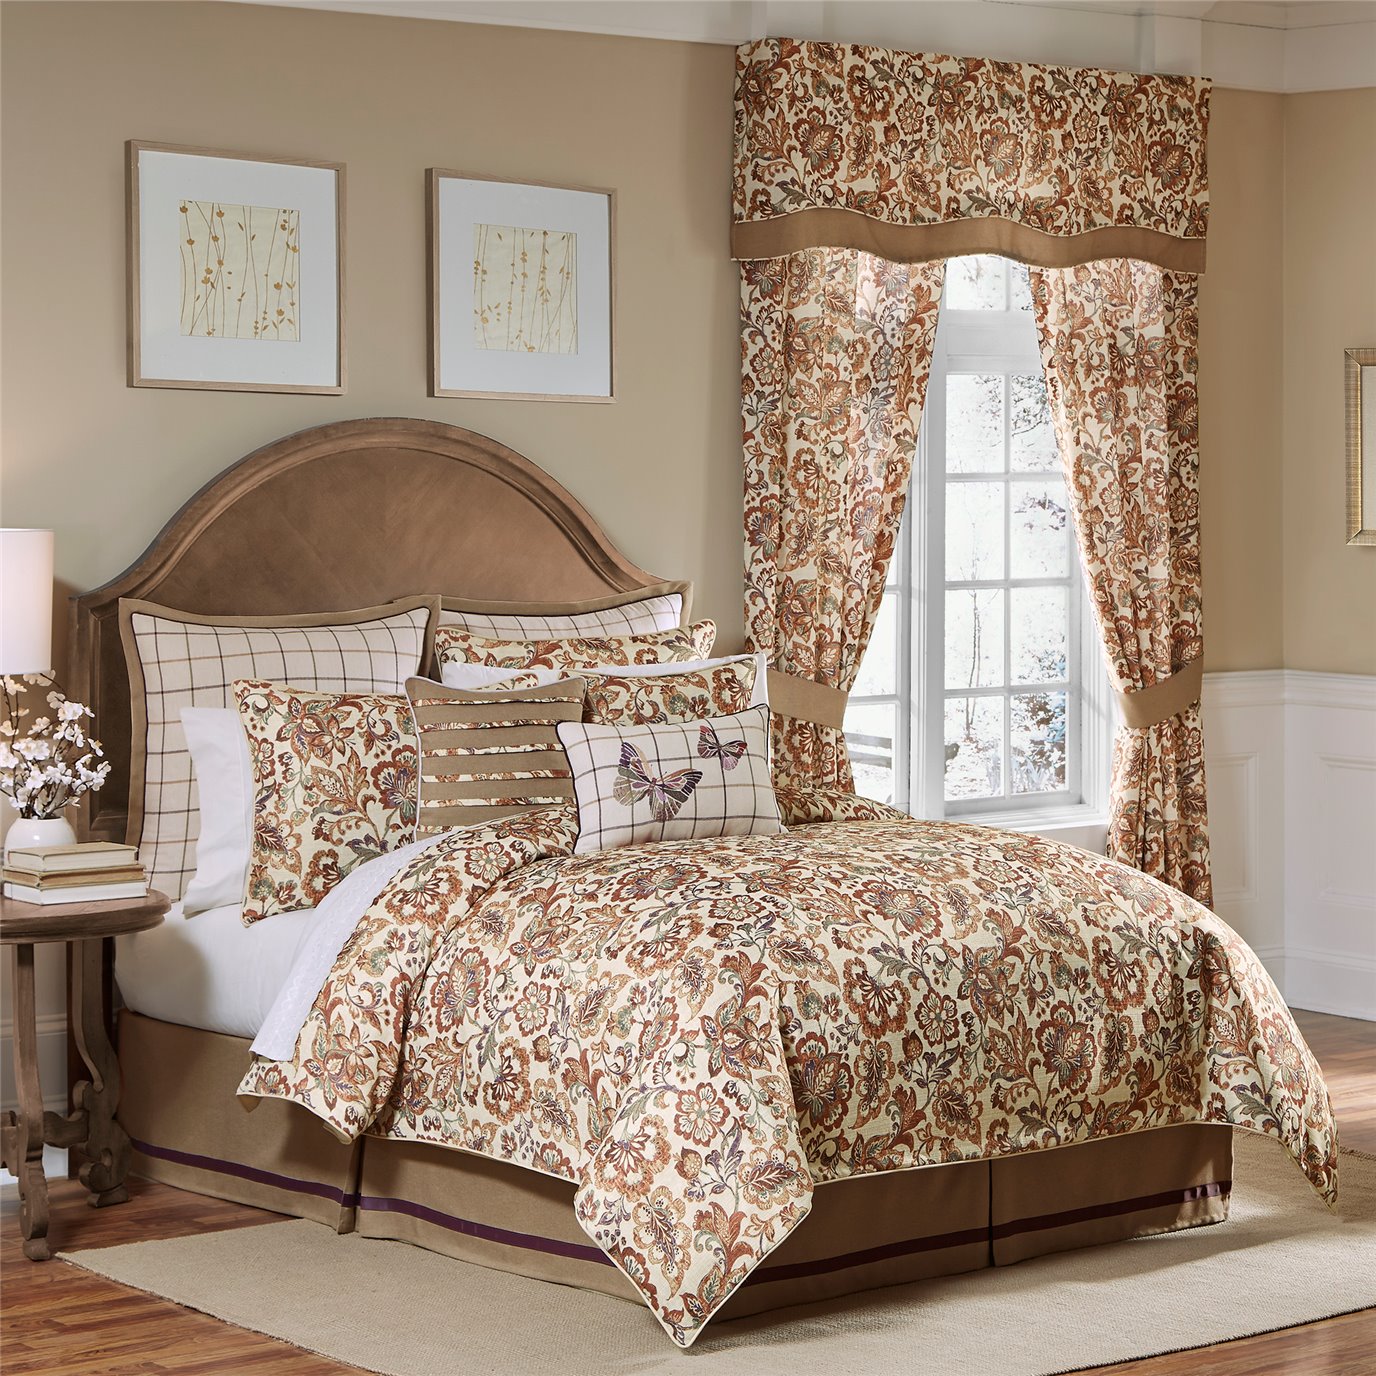 Delilah 4-piece Cal King Comforter Set by Croscill